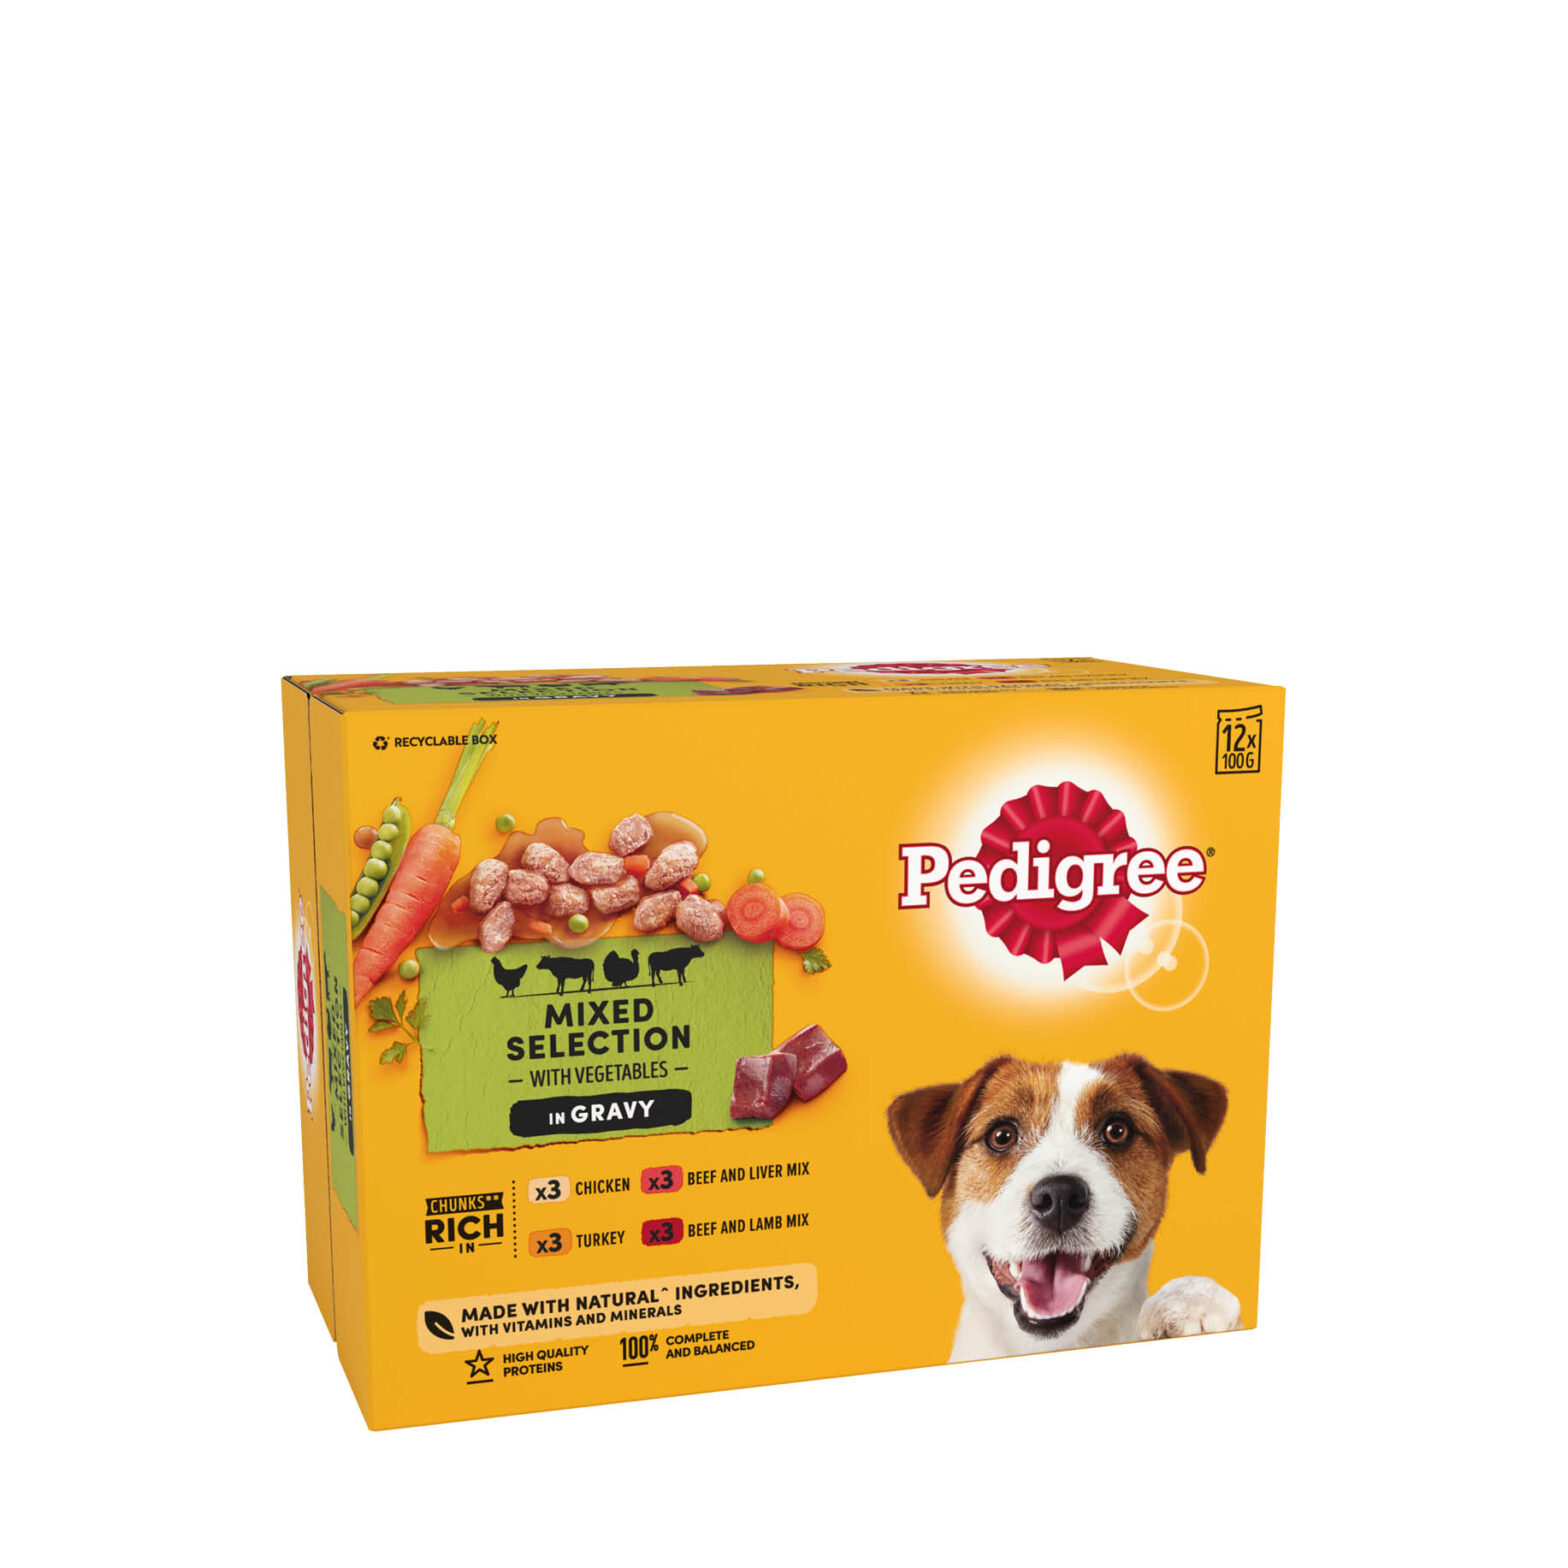 Pedigree Mixed Selection In Gravy Pouch 12 Pack